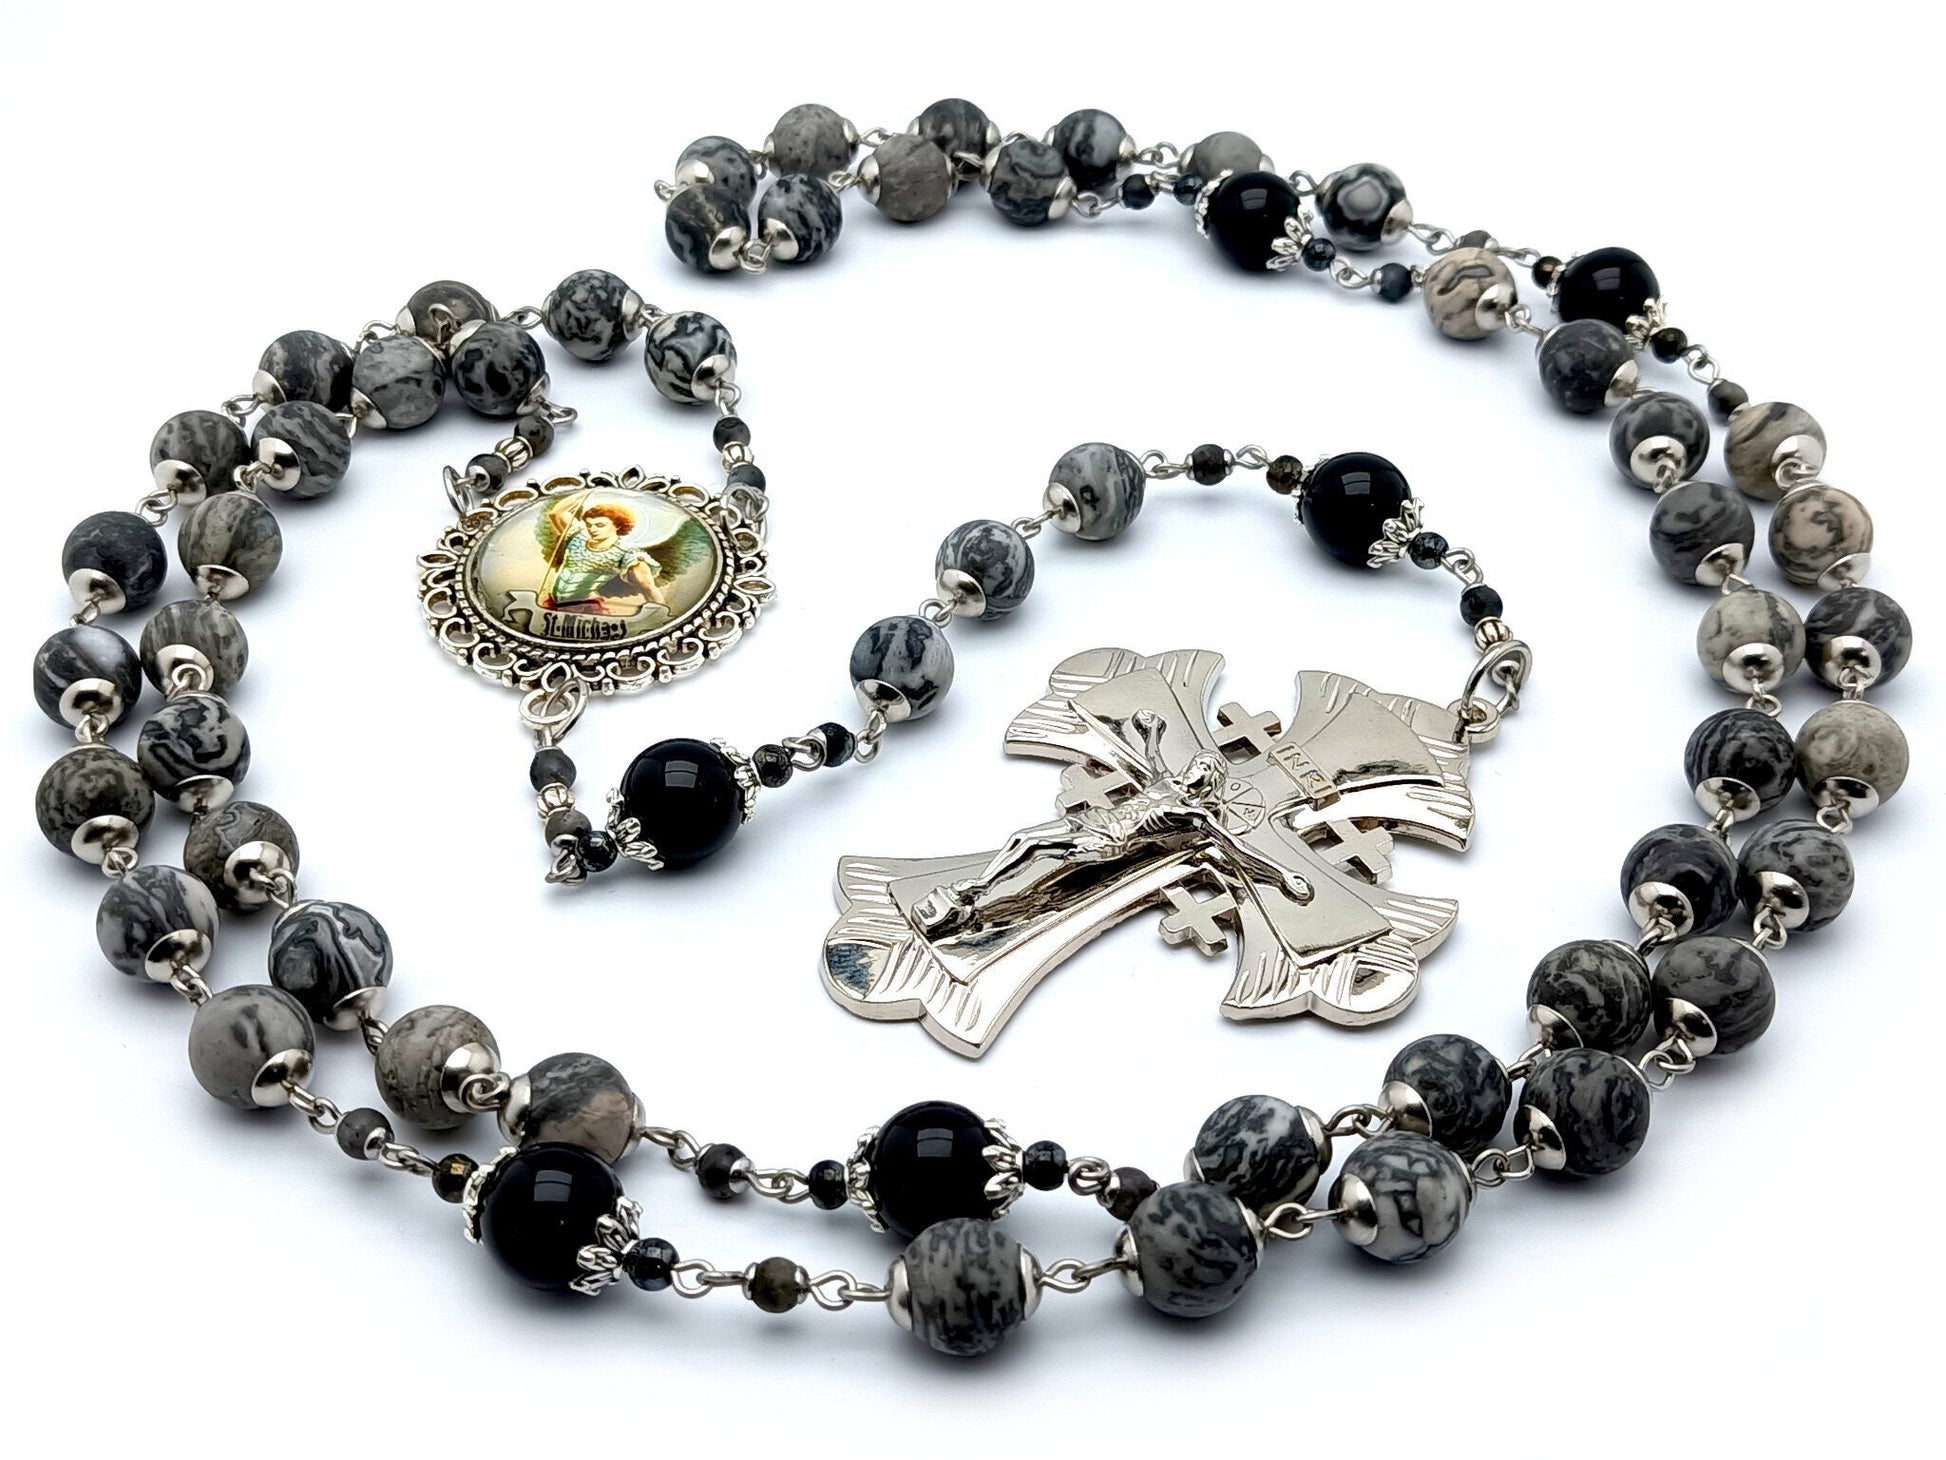 Saint Michael unique rosary beads with lavakite and onyx gemstone beads, large silver plated crucifix and picture centre medal.